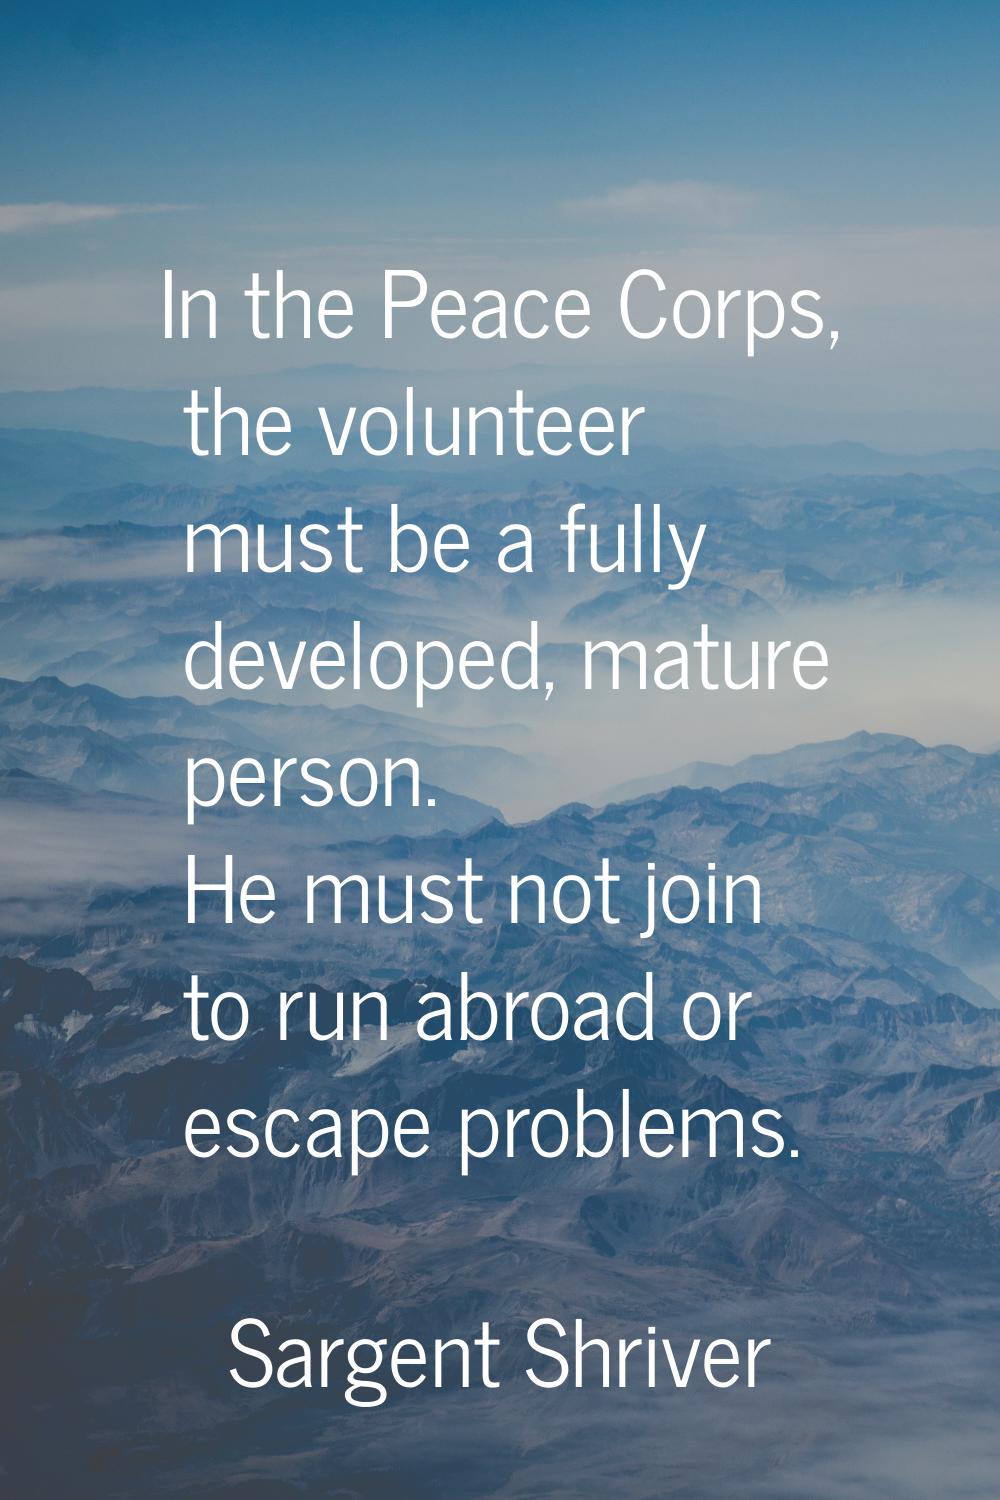 In the Peace Corps, the volunteer must be a fully developed, mature person. He must not join to run